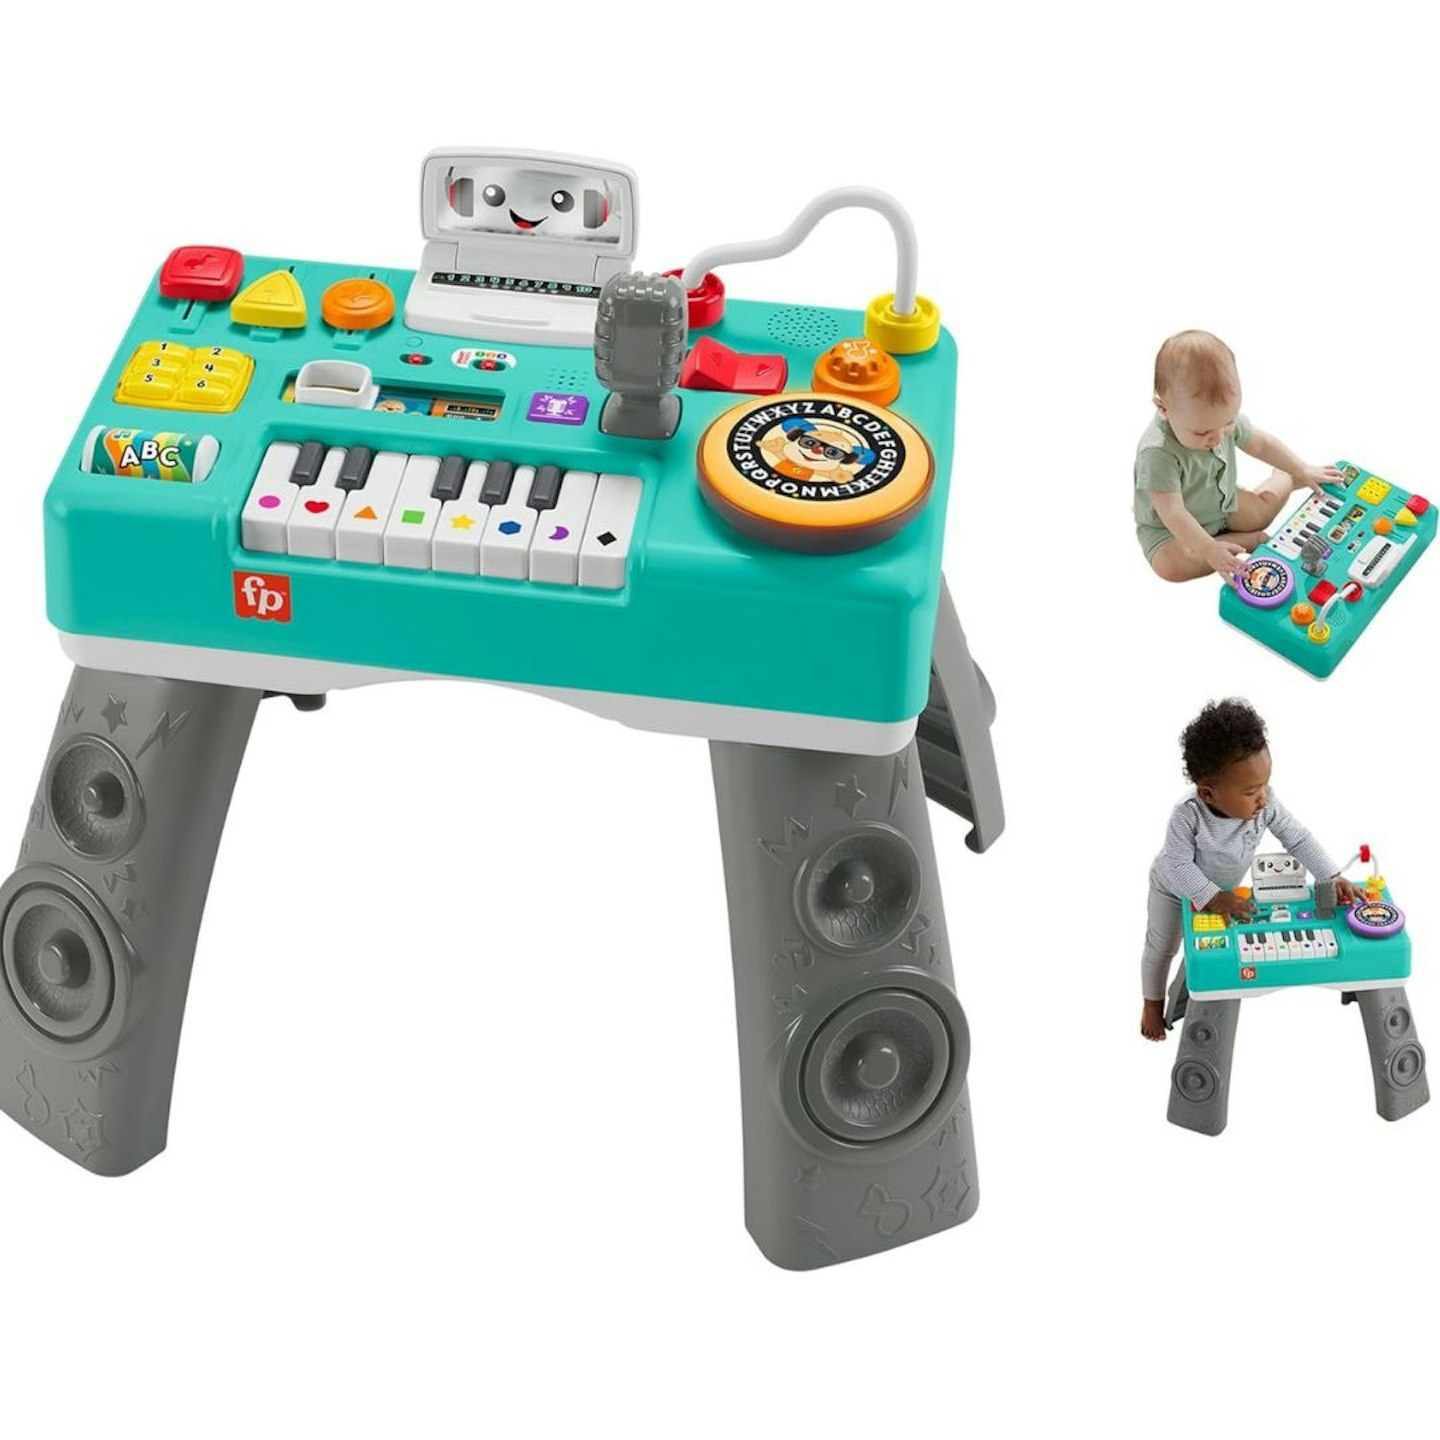 The Top Ten John Lewis Christmas Toys: Fisher-Price Mix and Learn Music Table